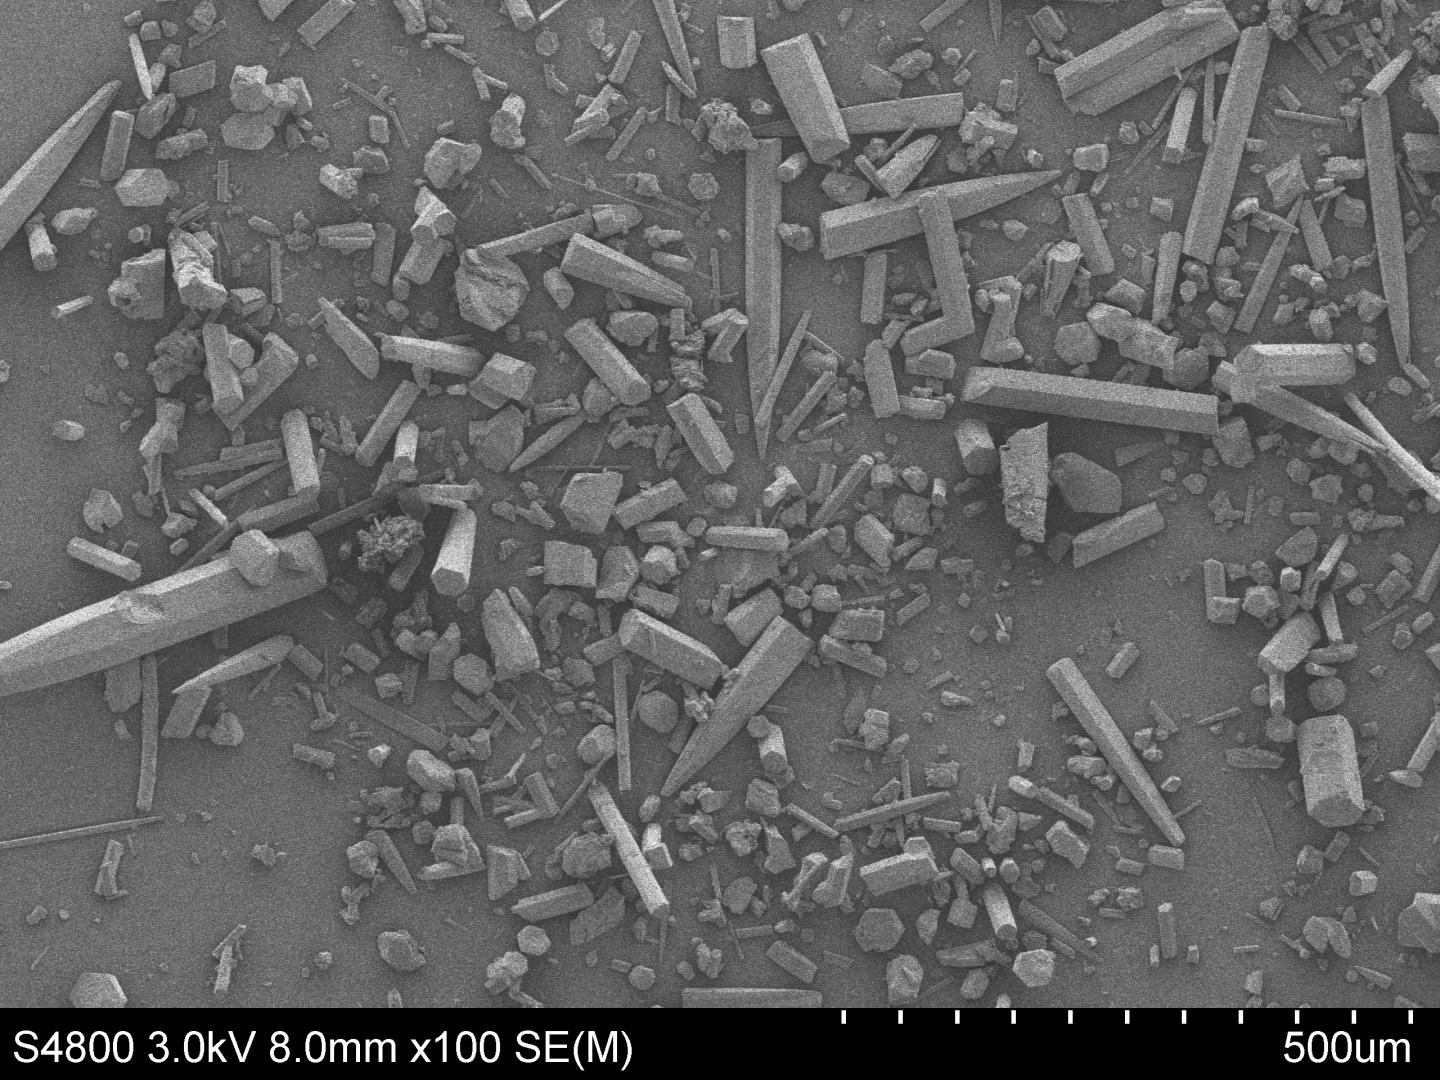 Electron Microscope Images of Crystals of Material Discovered Using New Method